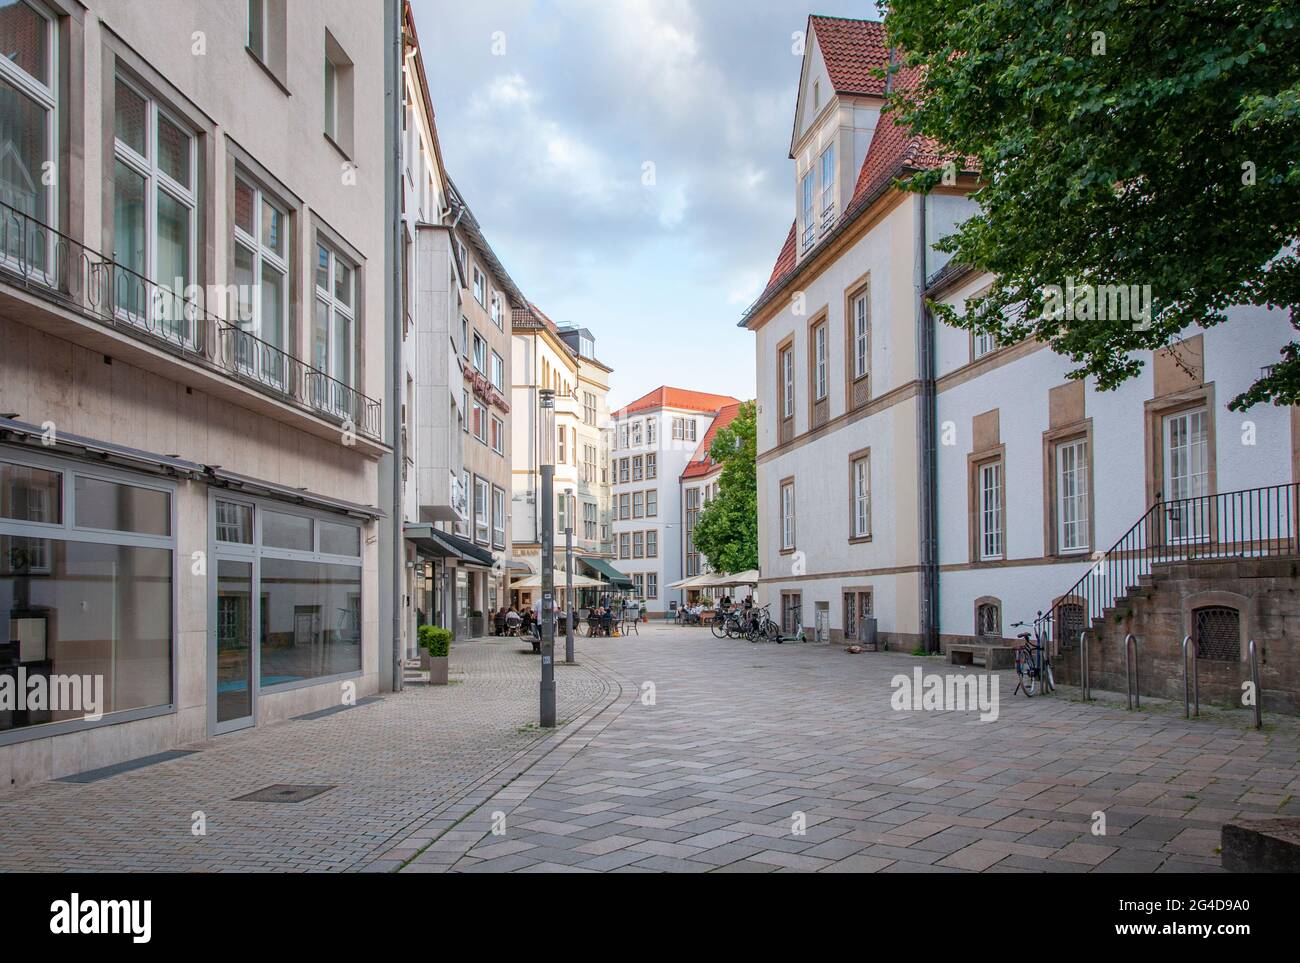 BIELEFELD, GERMANY. JUNE 12, 2021. Beautiful view of small german town with typical architecture. Restaurants on the street. Stock Photo